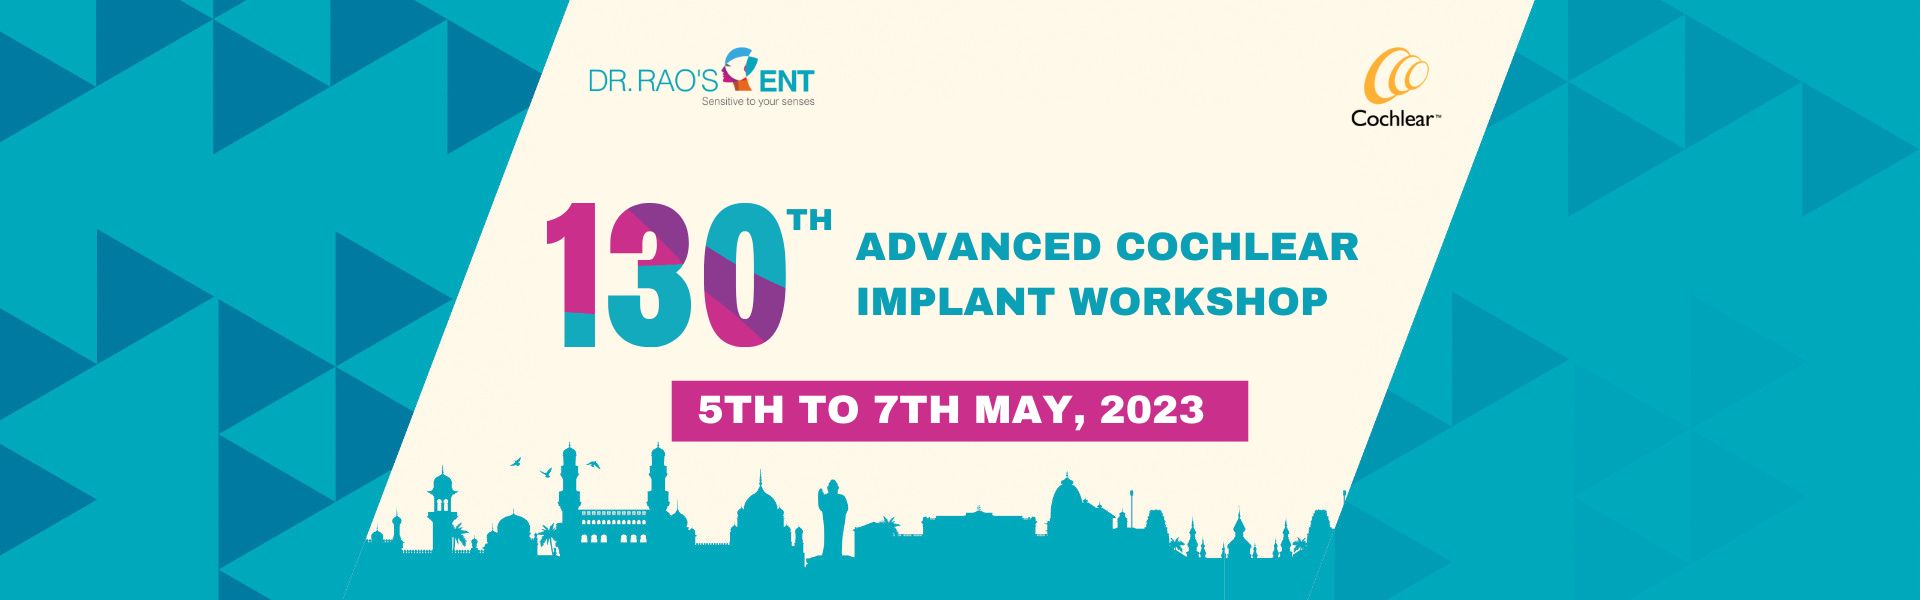 Advanced Cochlear Implant Workshop